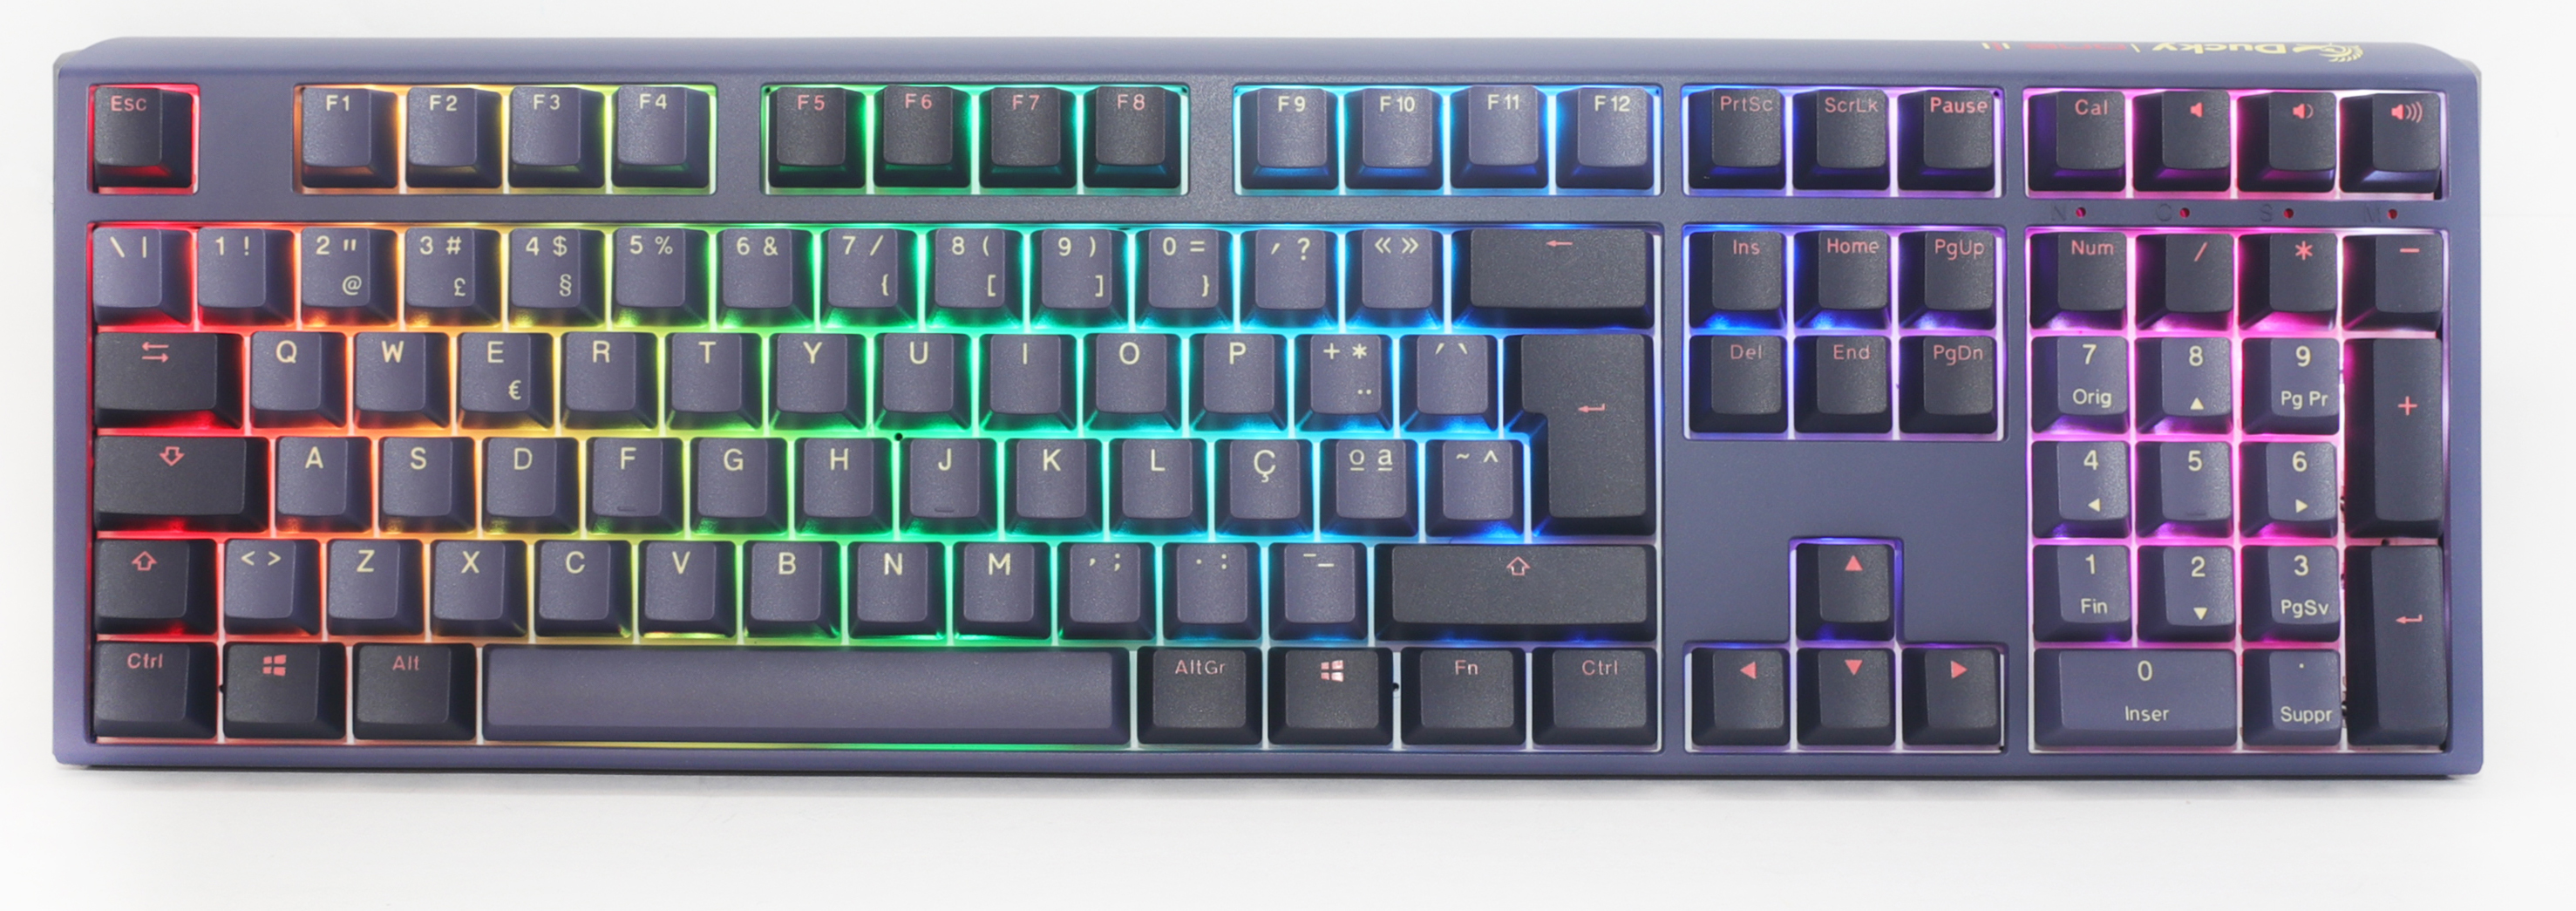 Teclado Ducky One 3 Cosmic Full-Size, Hot-Swappable, MX-Blue, PBT - Mecânico (PT)